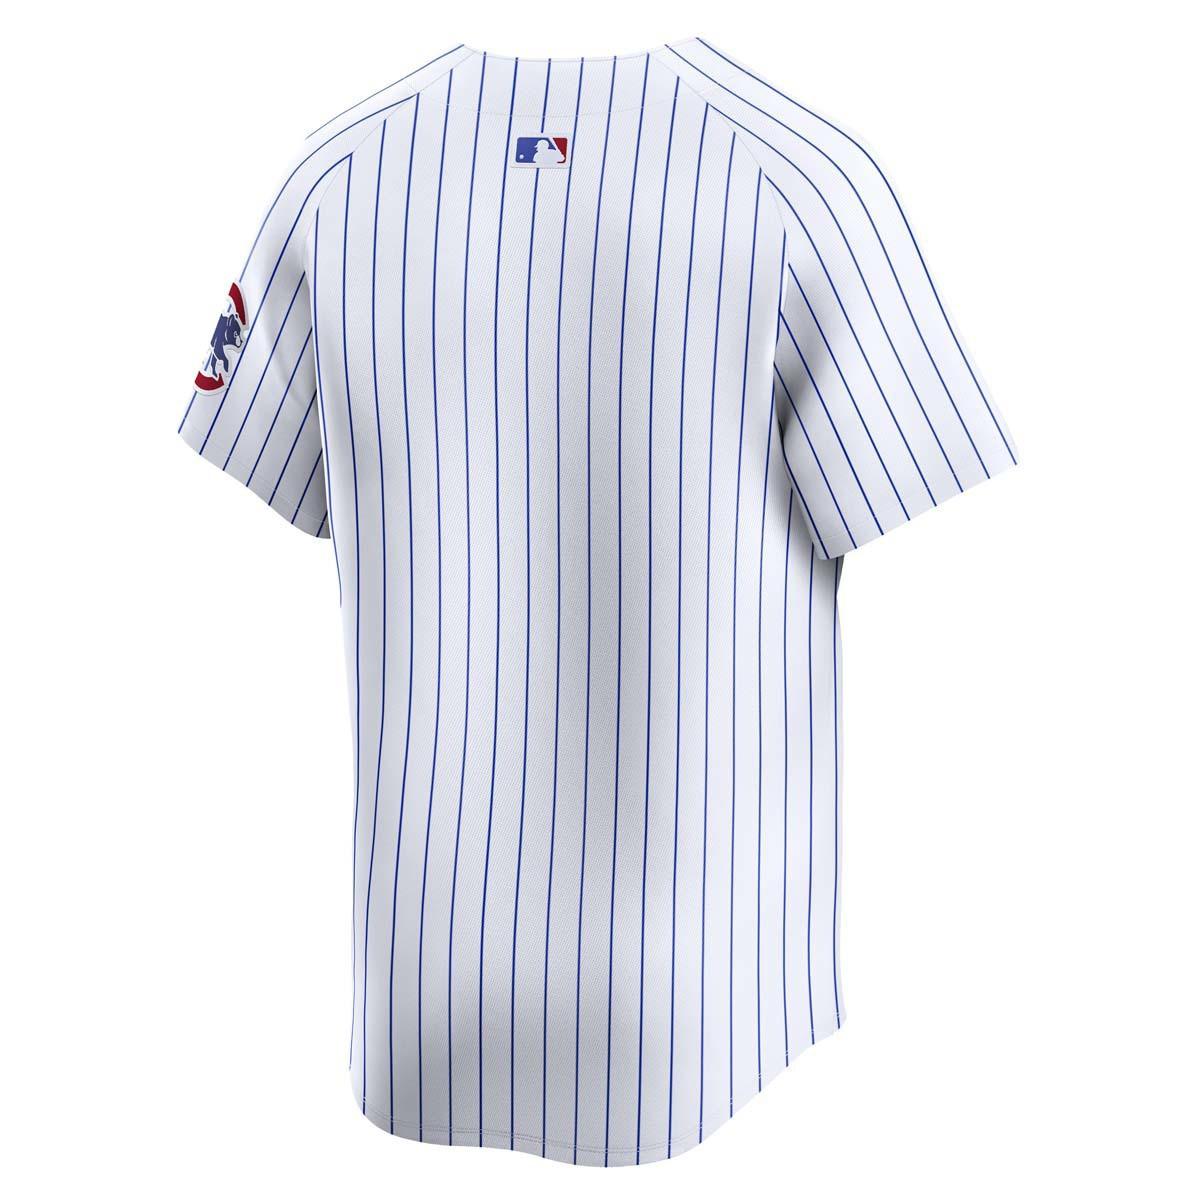 CHICAGO CUBS NIKE MEN'S LIMITED PINSTRIPE HOME JERSEY